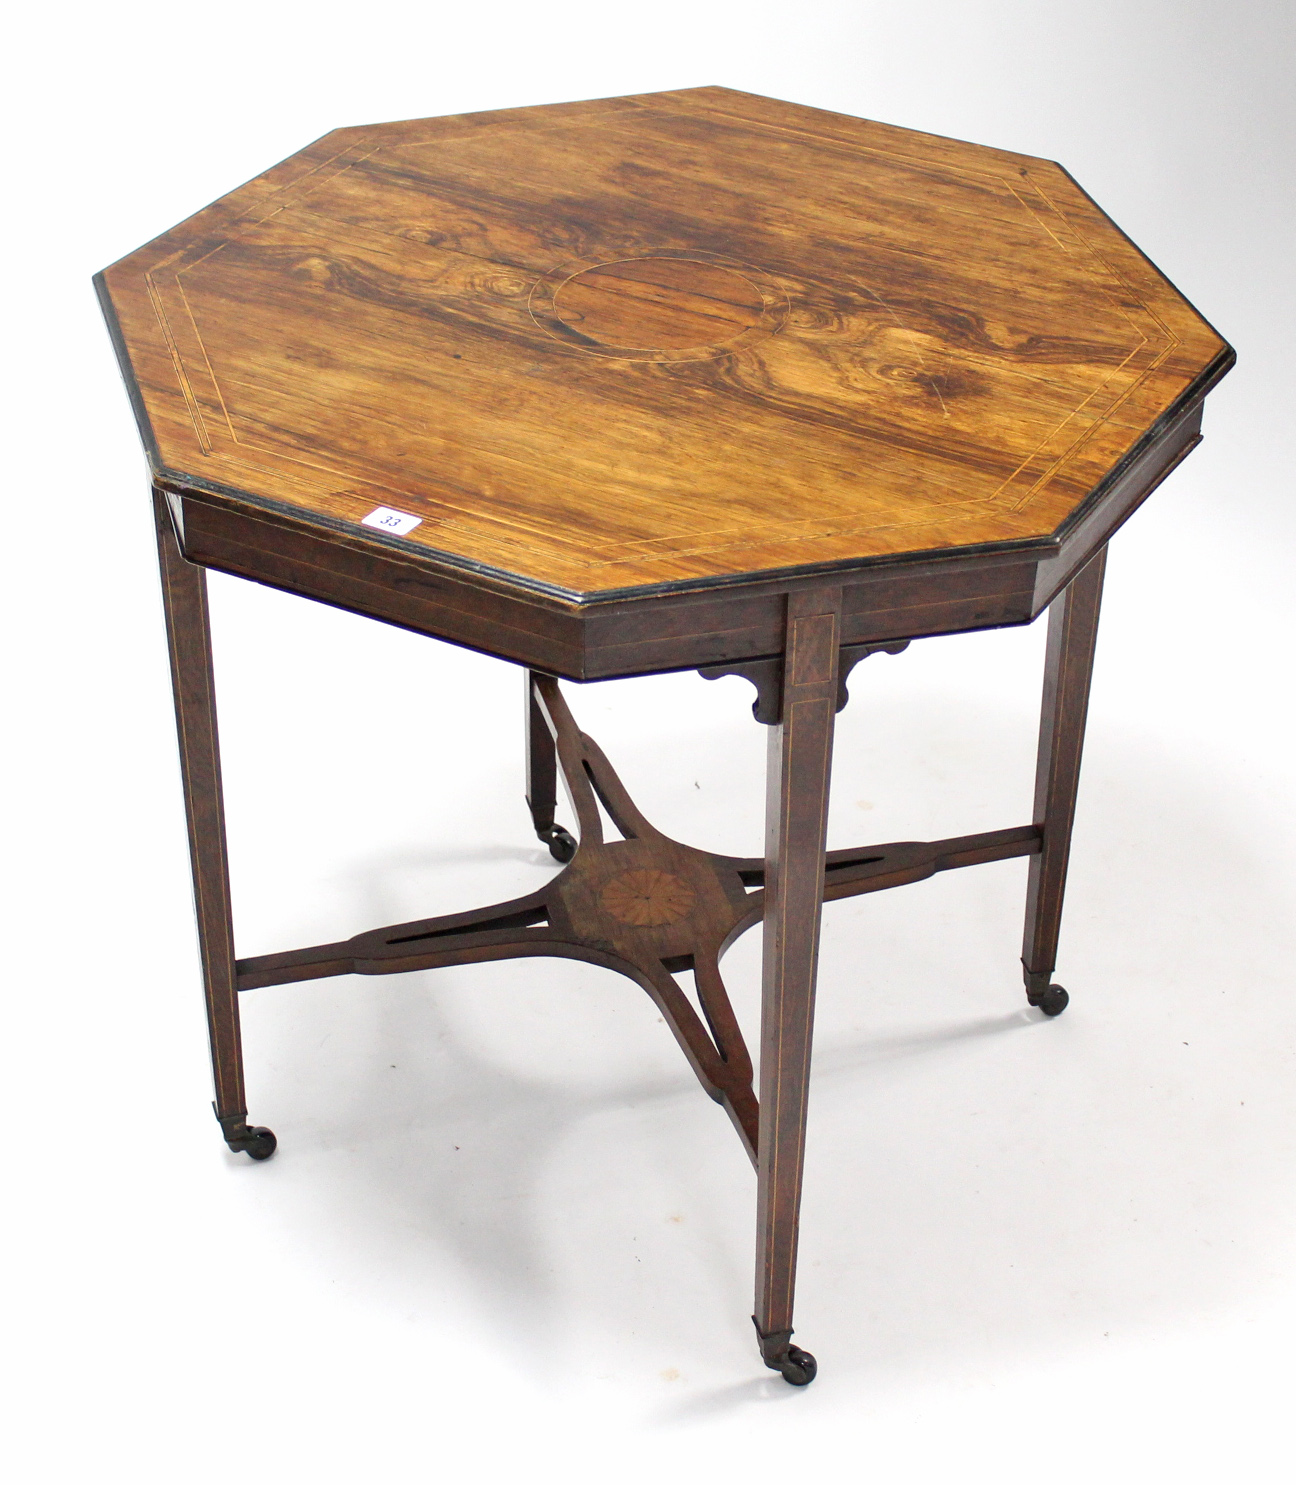 A 19th century inlaid rosewood octagonal centre table on square tapered legs & ceramic castors, with